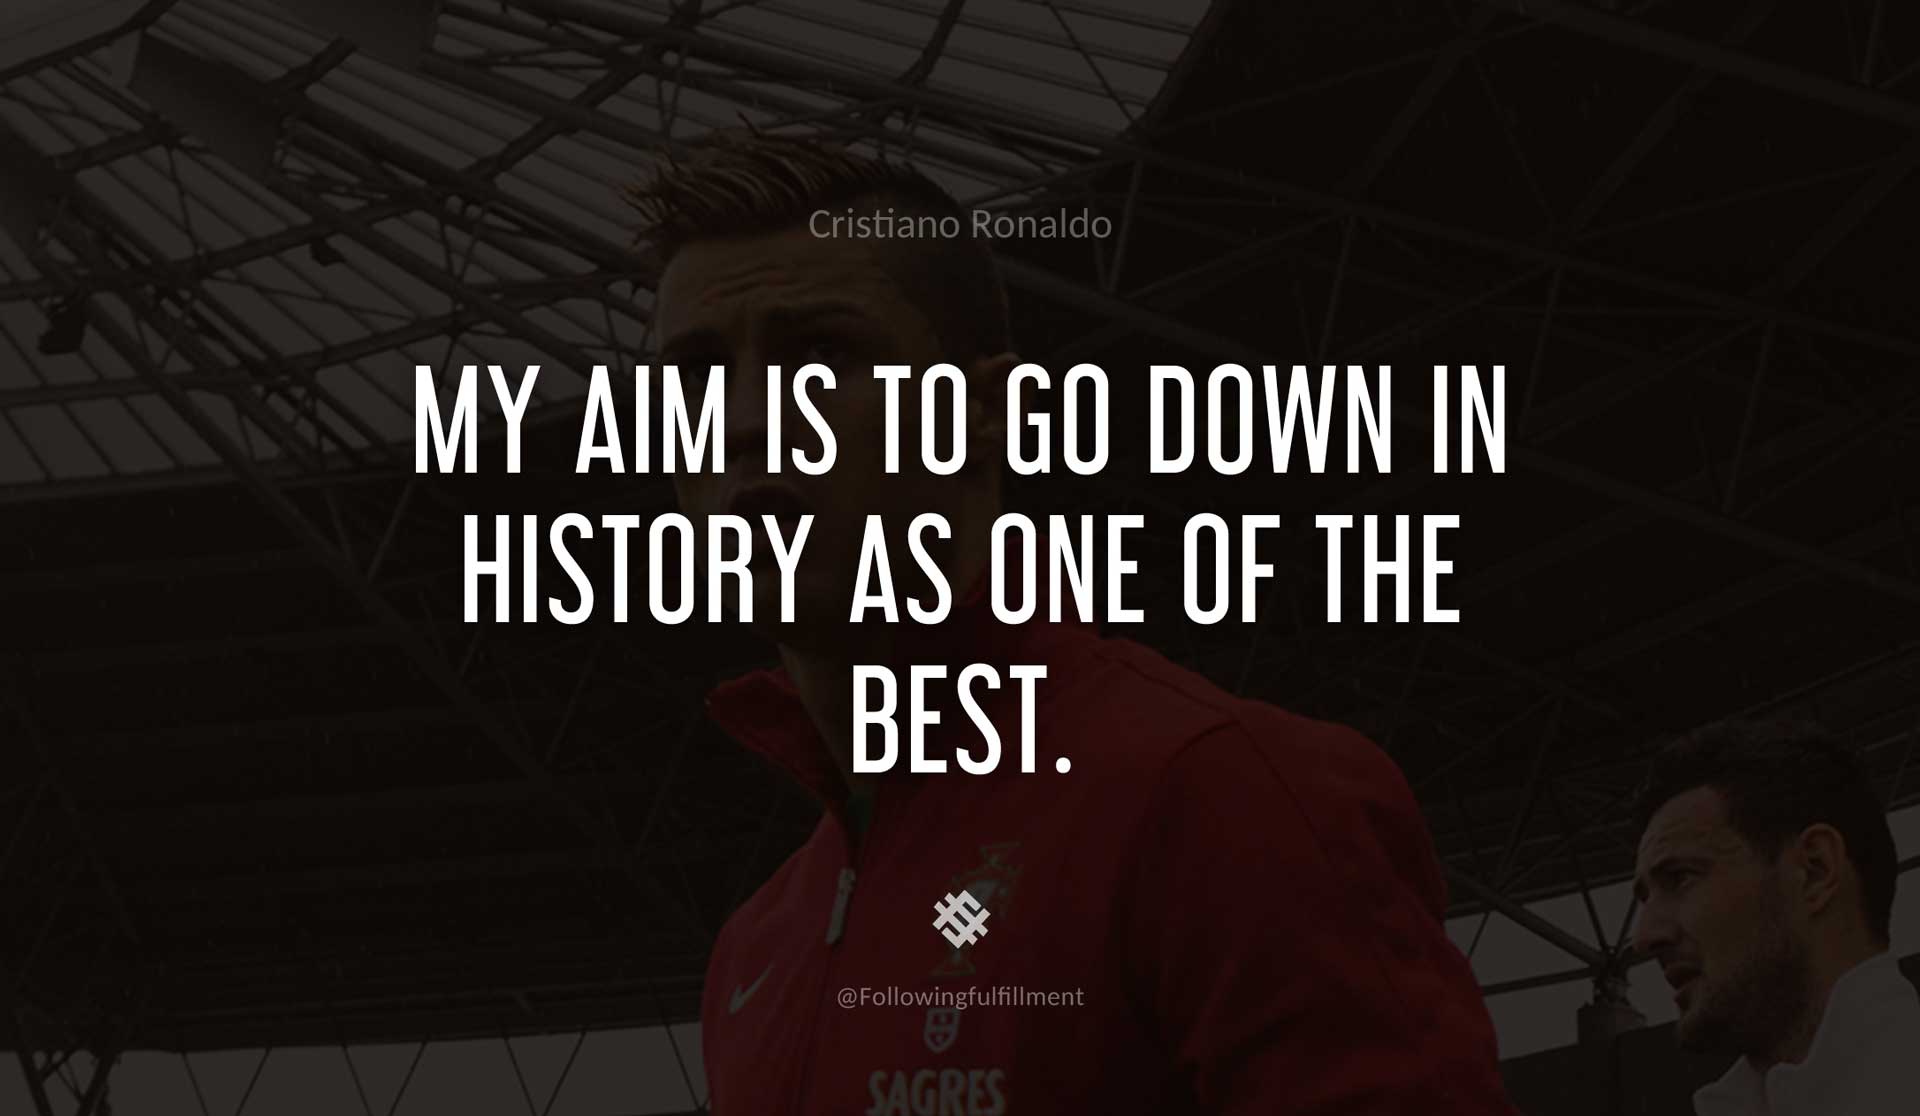 My-aim-is-to-go-down-in-history-as-one-of-the-best.-CRISTIANO-RONALDO-Quote.jpg